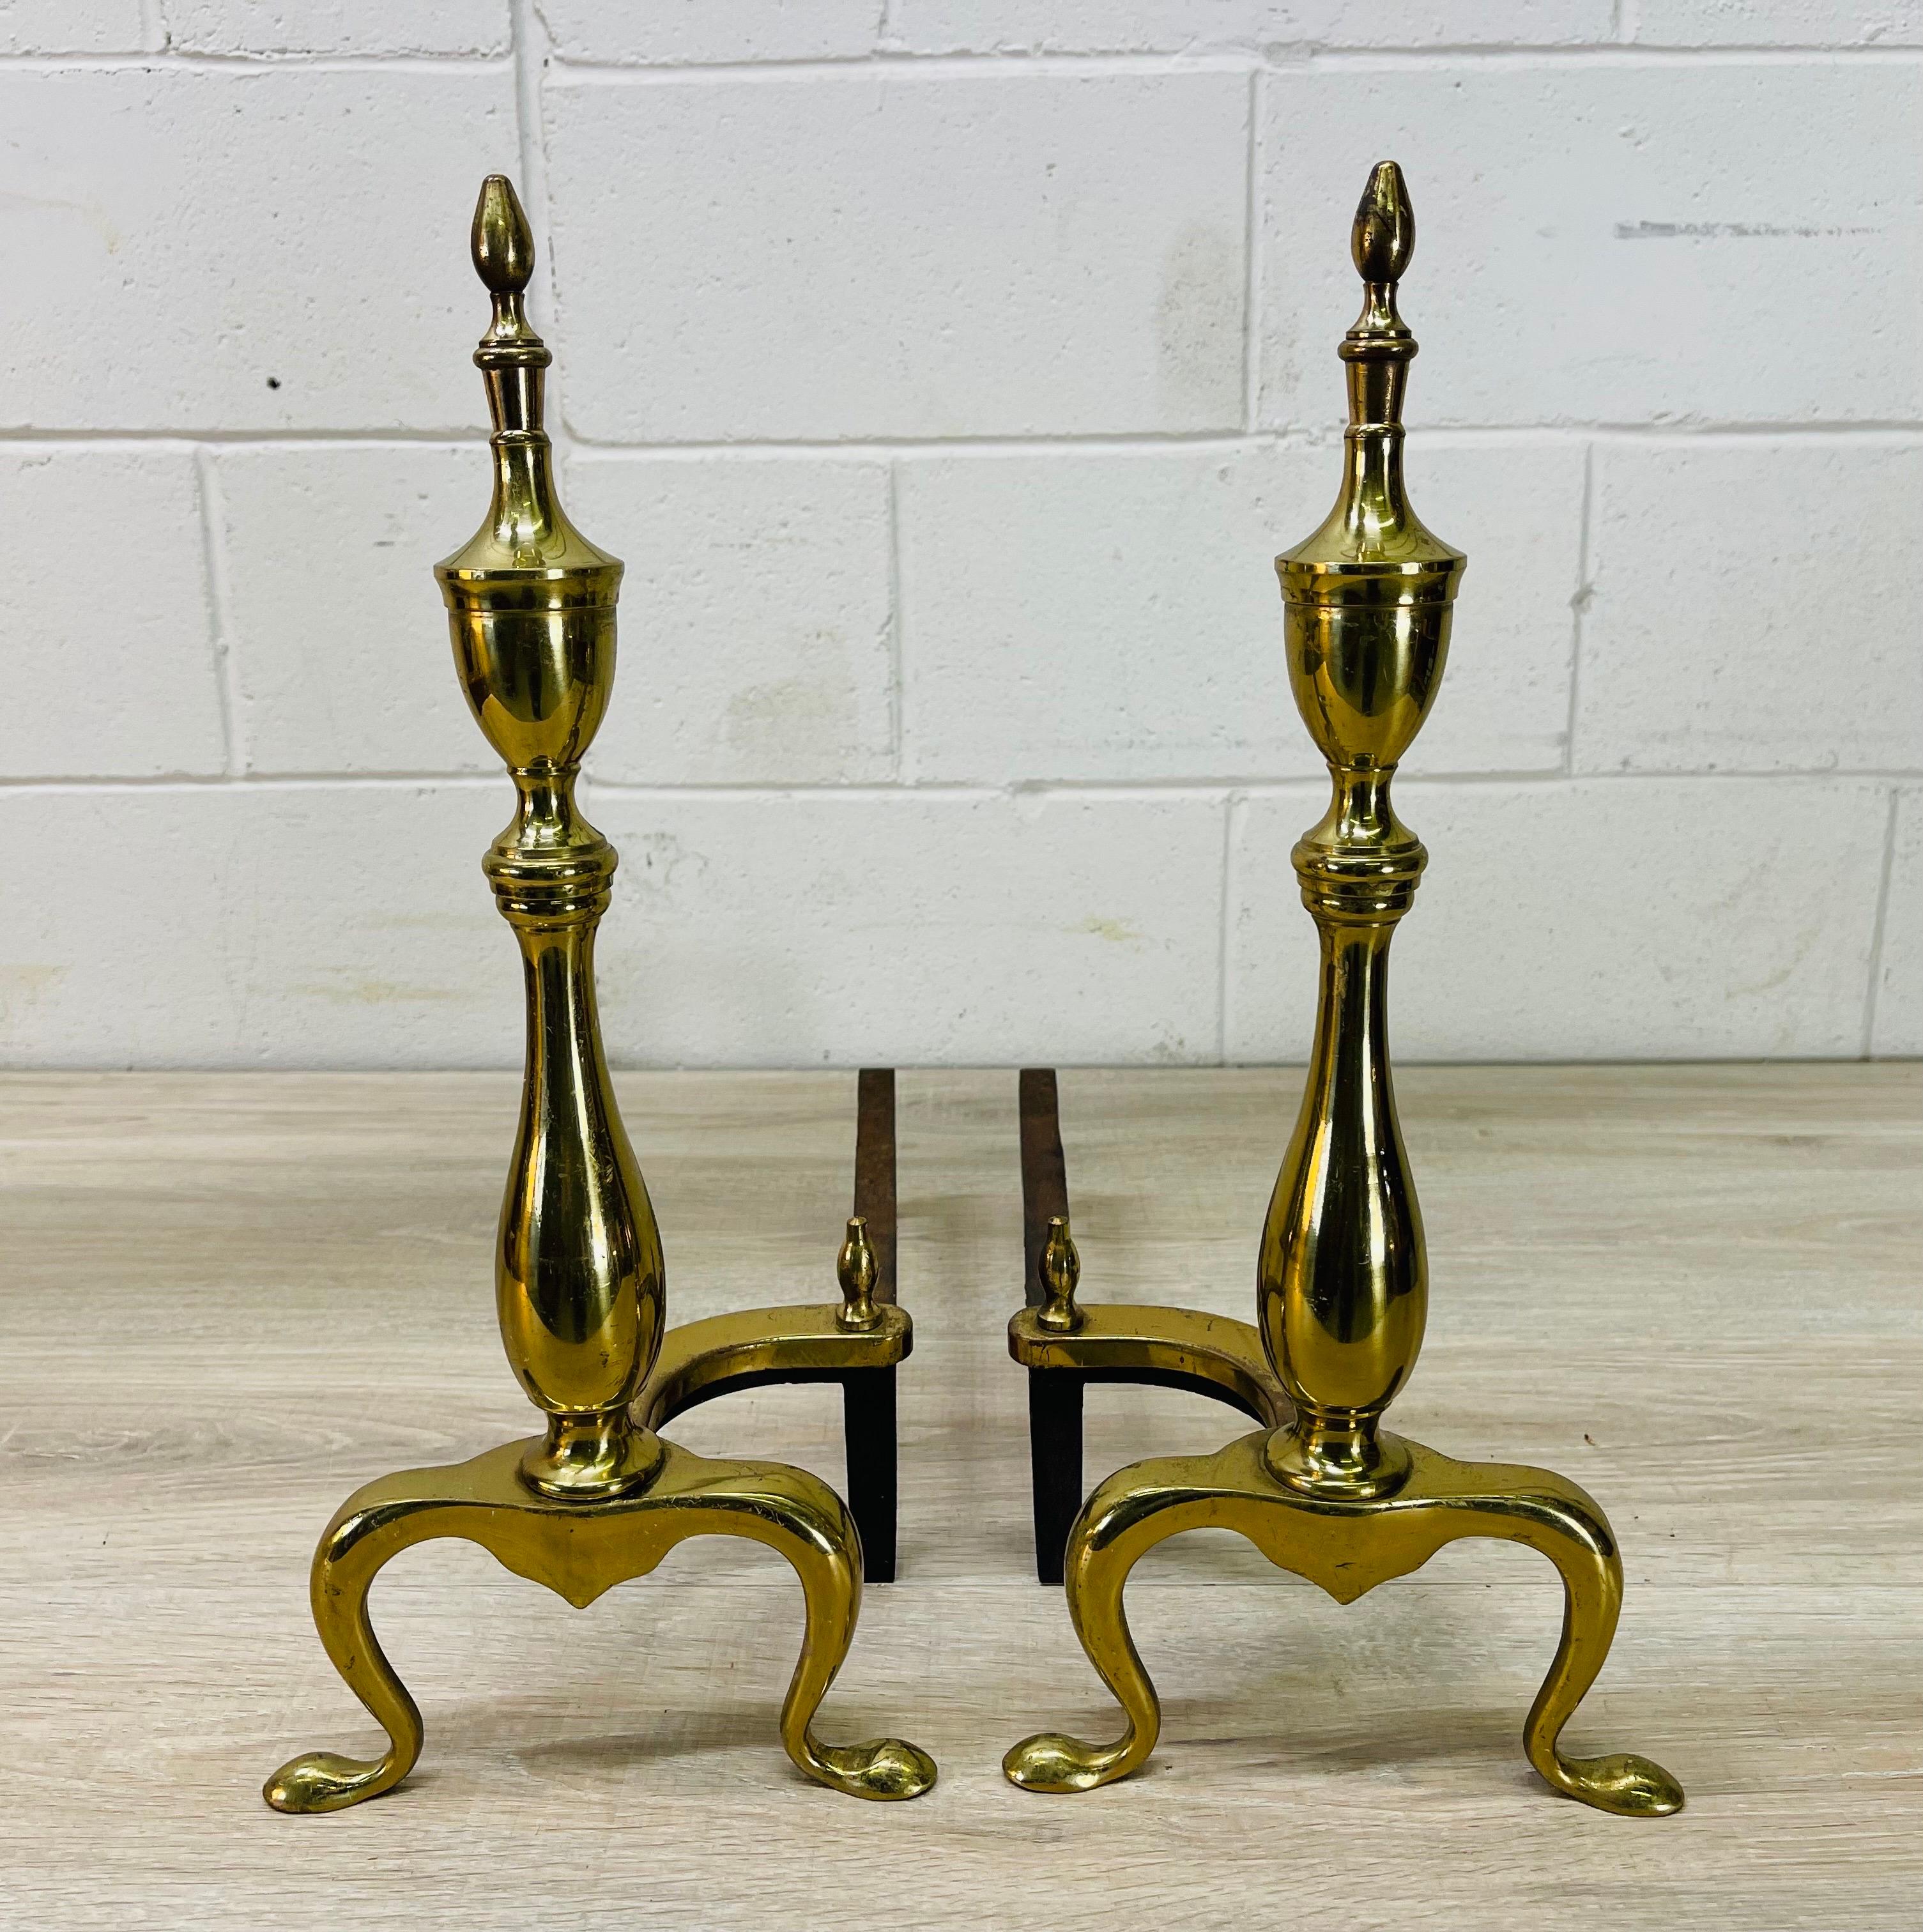 Vintage 1960s pair of Federal style brass fireplace andirons. They are tall and will hold a good amount of wood. The andirons have a sleek and timeless design. No marks.